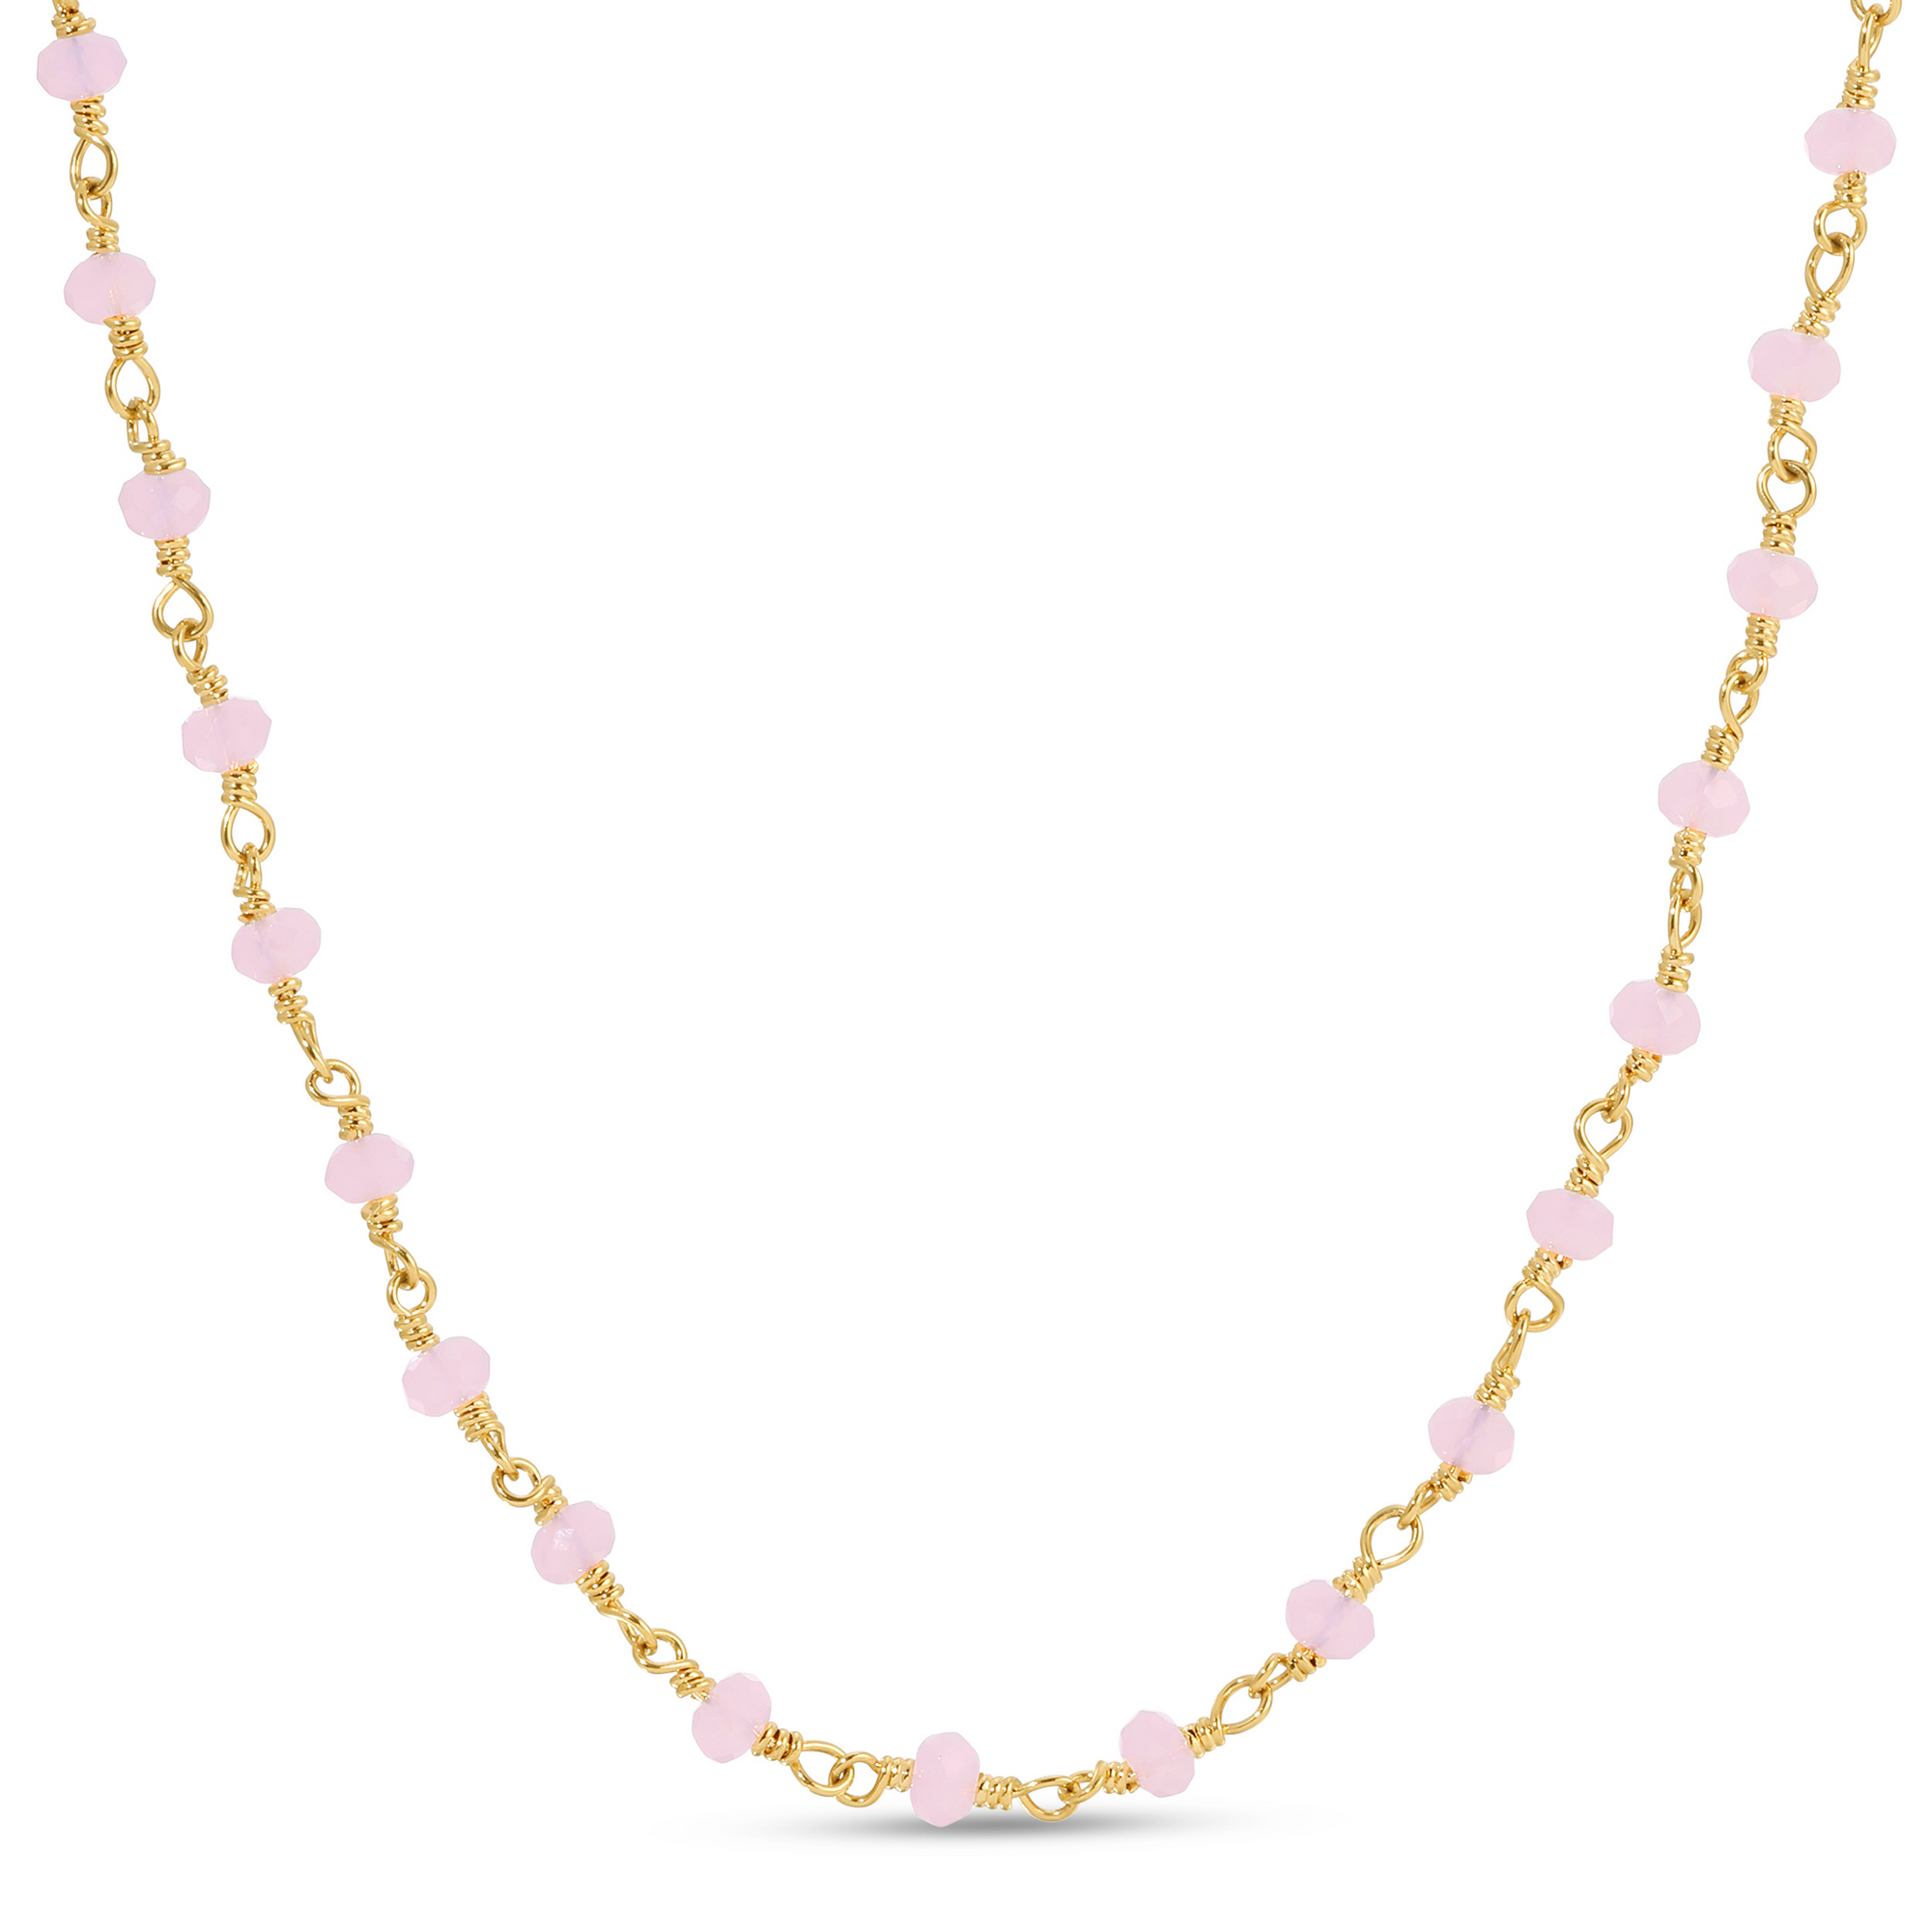 LUXE TURQUOISE CLOVER ROSE GOLD NECKLACE – Alique